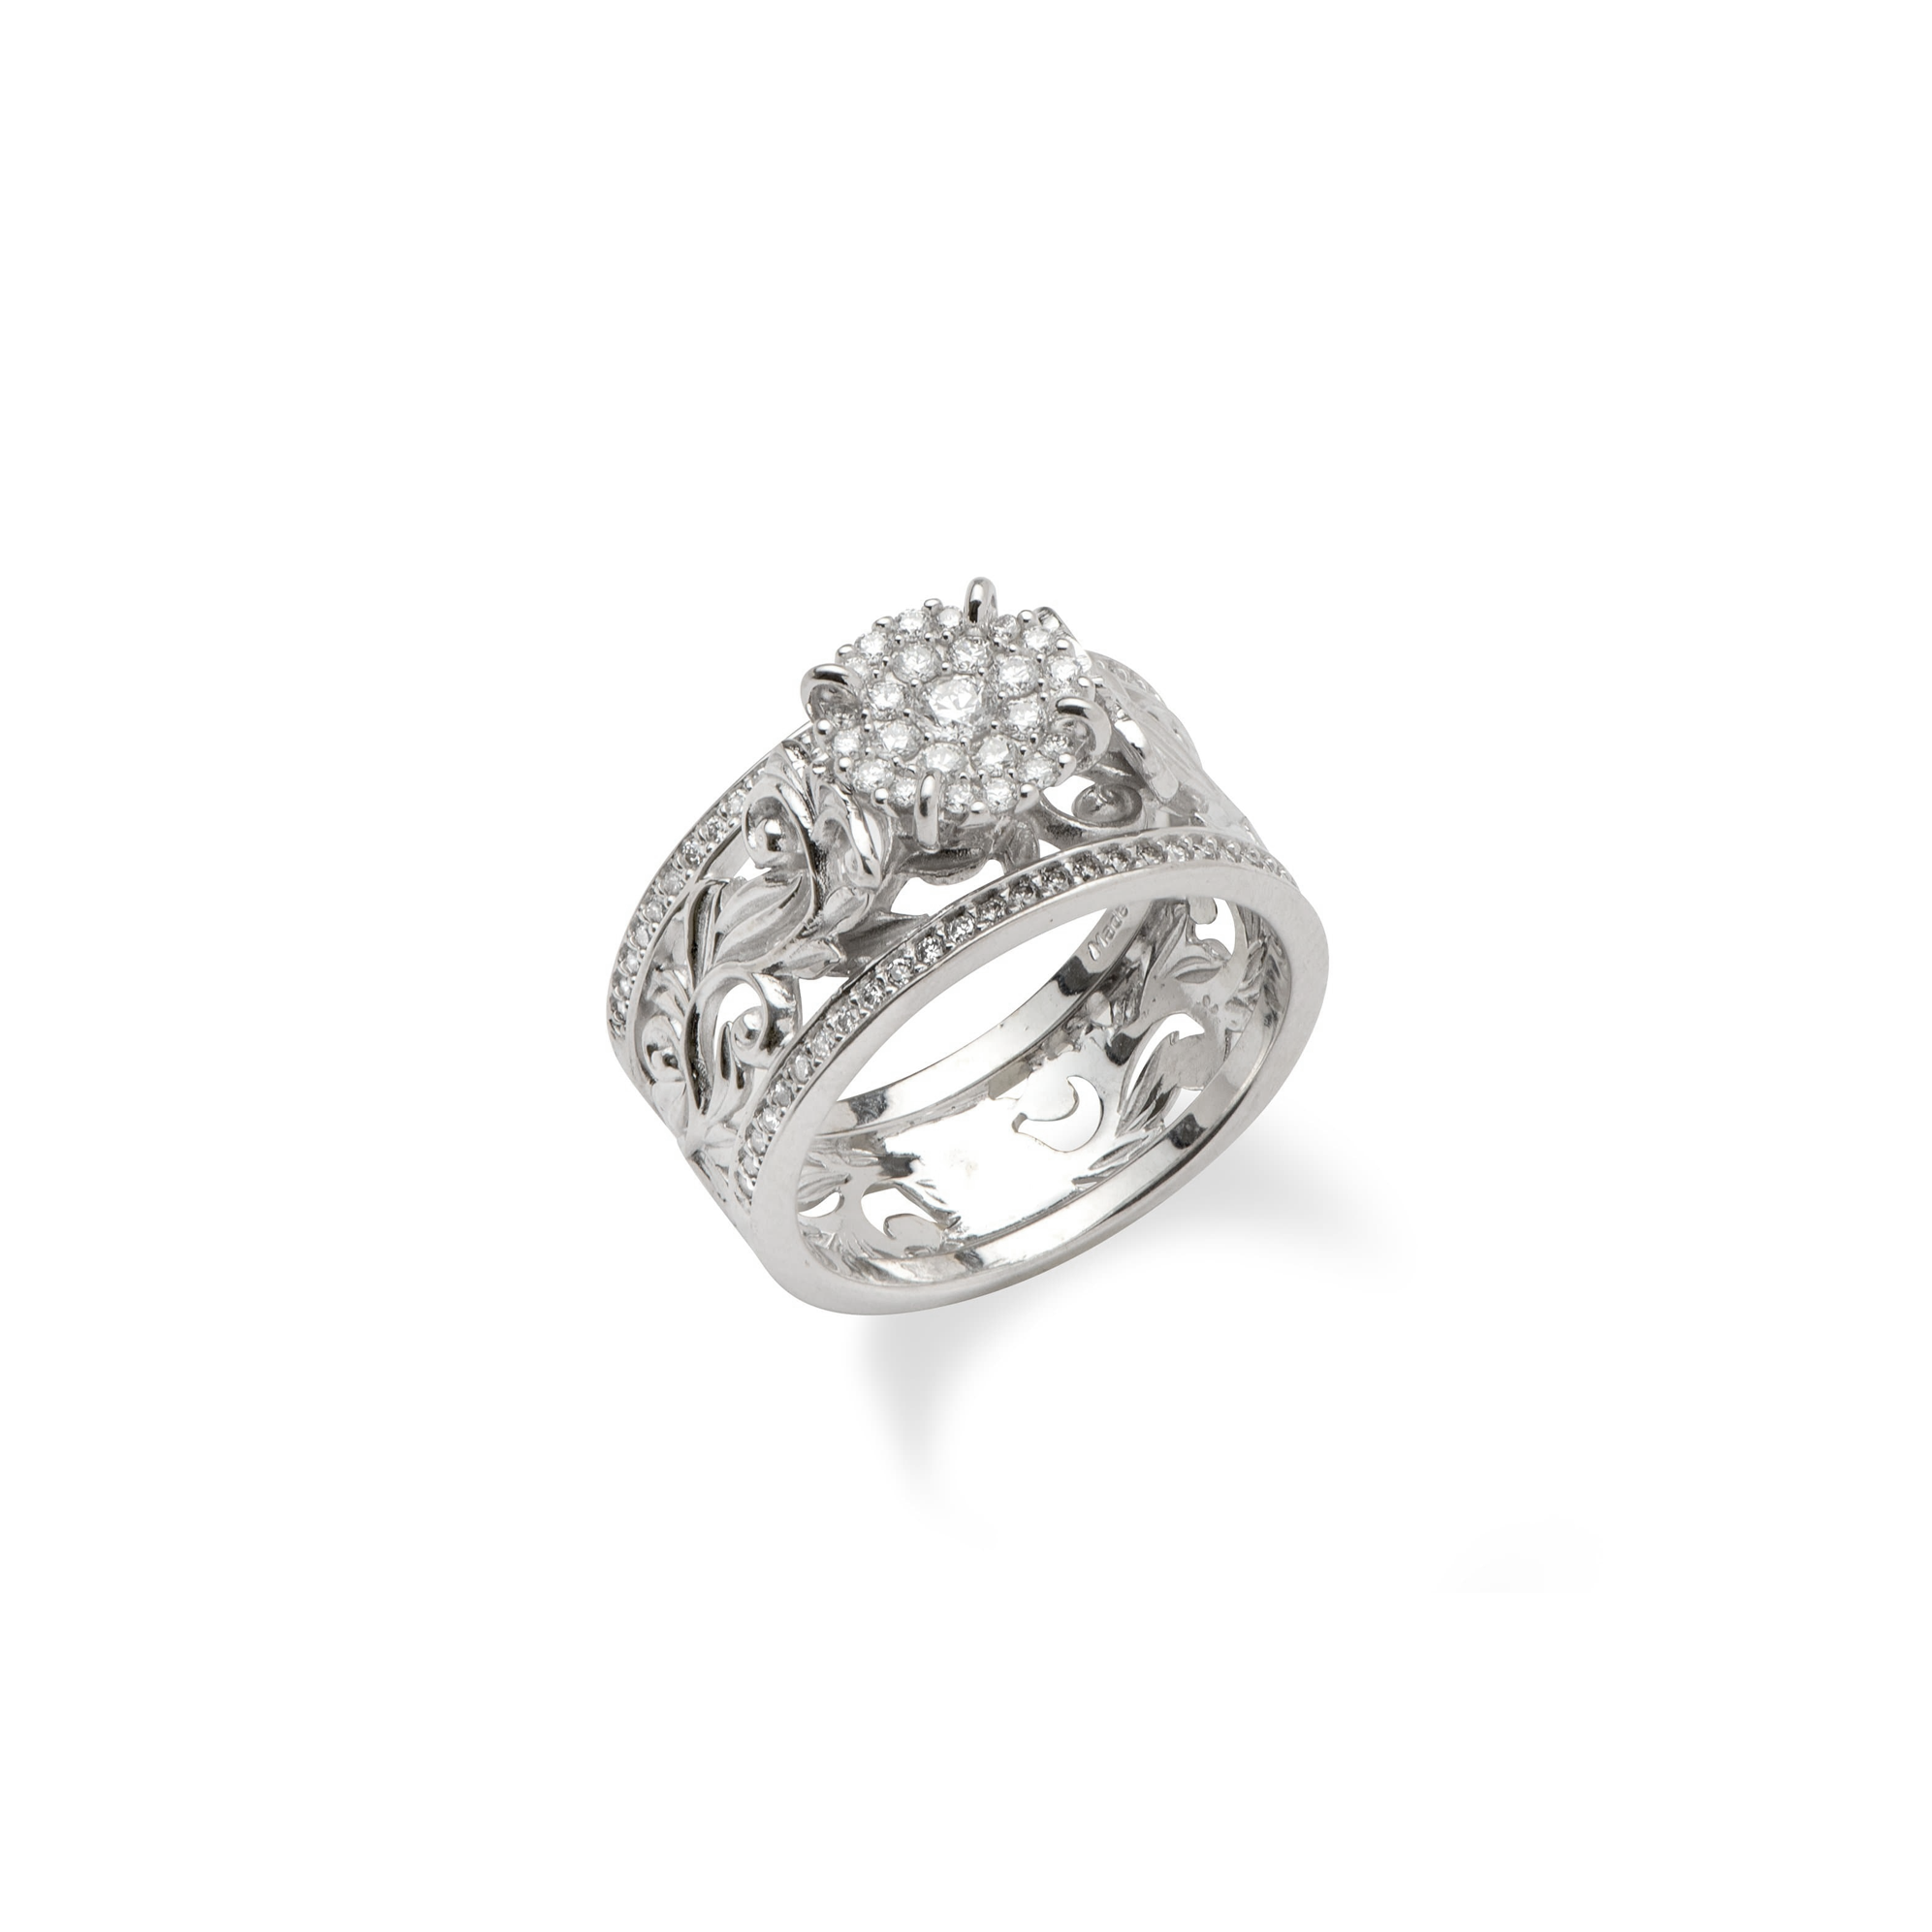 Living Heirloom Engagement Ring in White Gold with Diamonds - 10mm